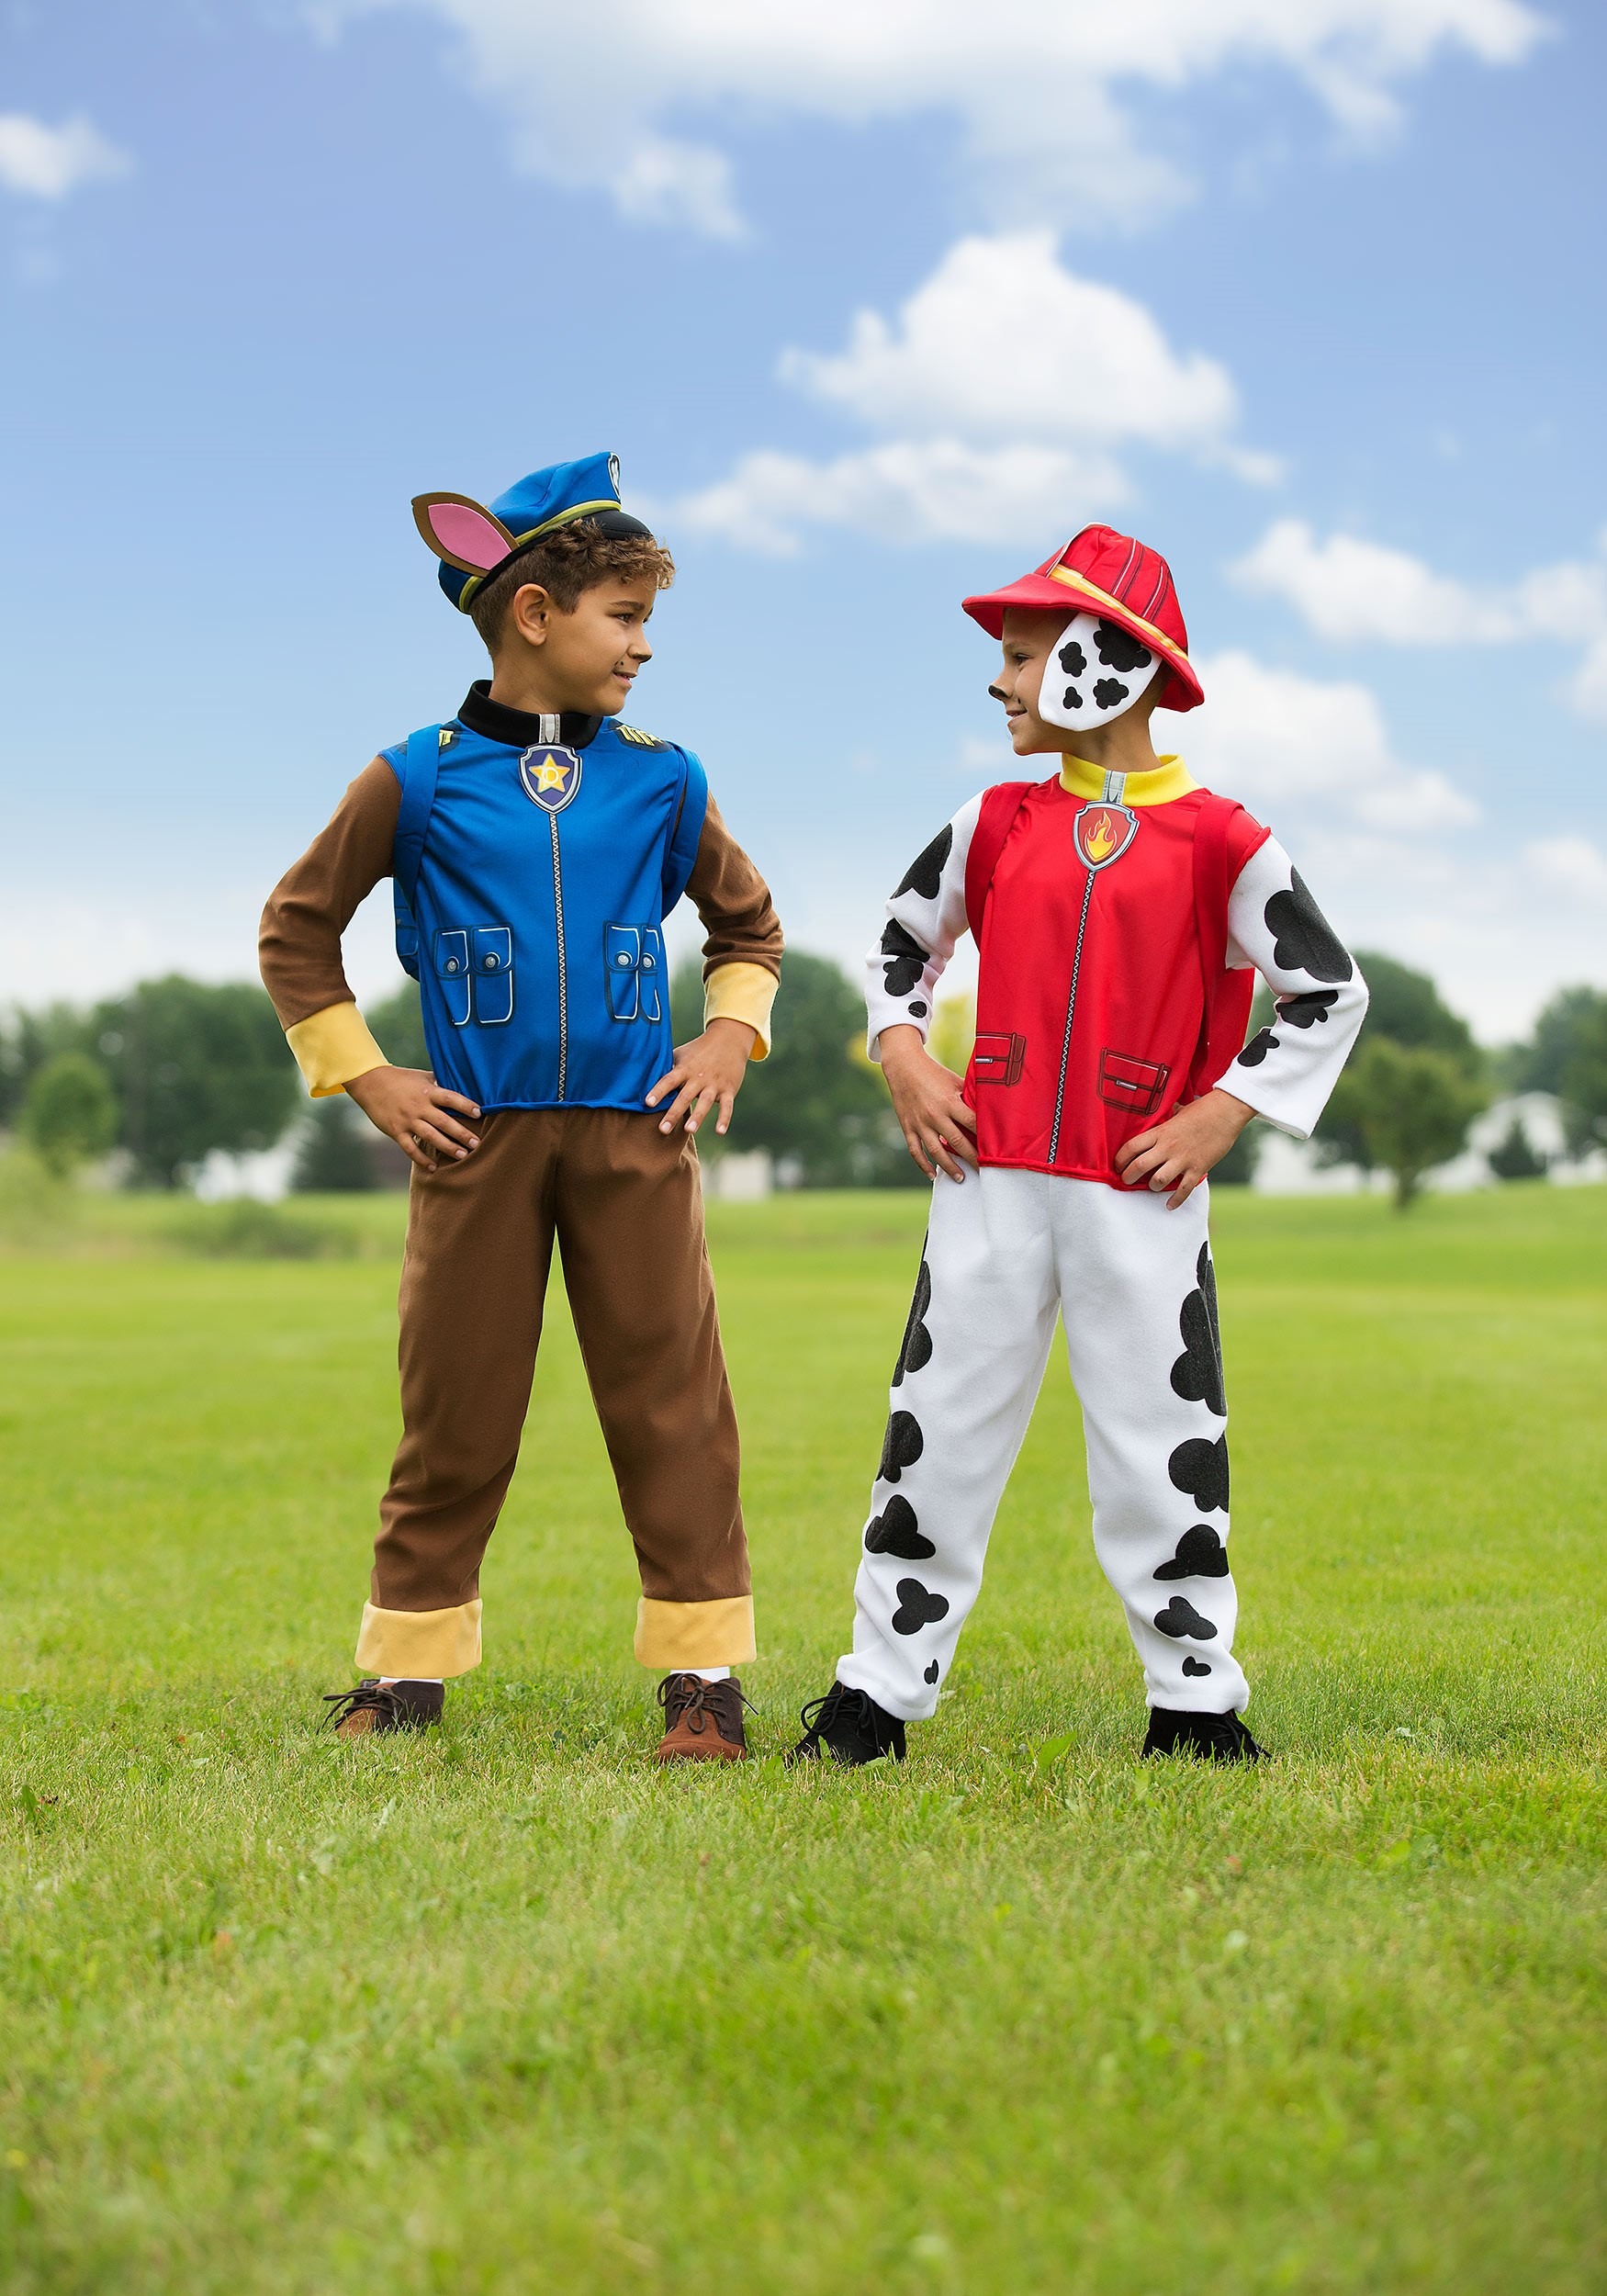 https://images.fun.com.au/products/27273/2-1-139147/paw-patrol-chase-child-costume-alt-1.jpg